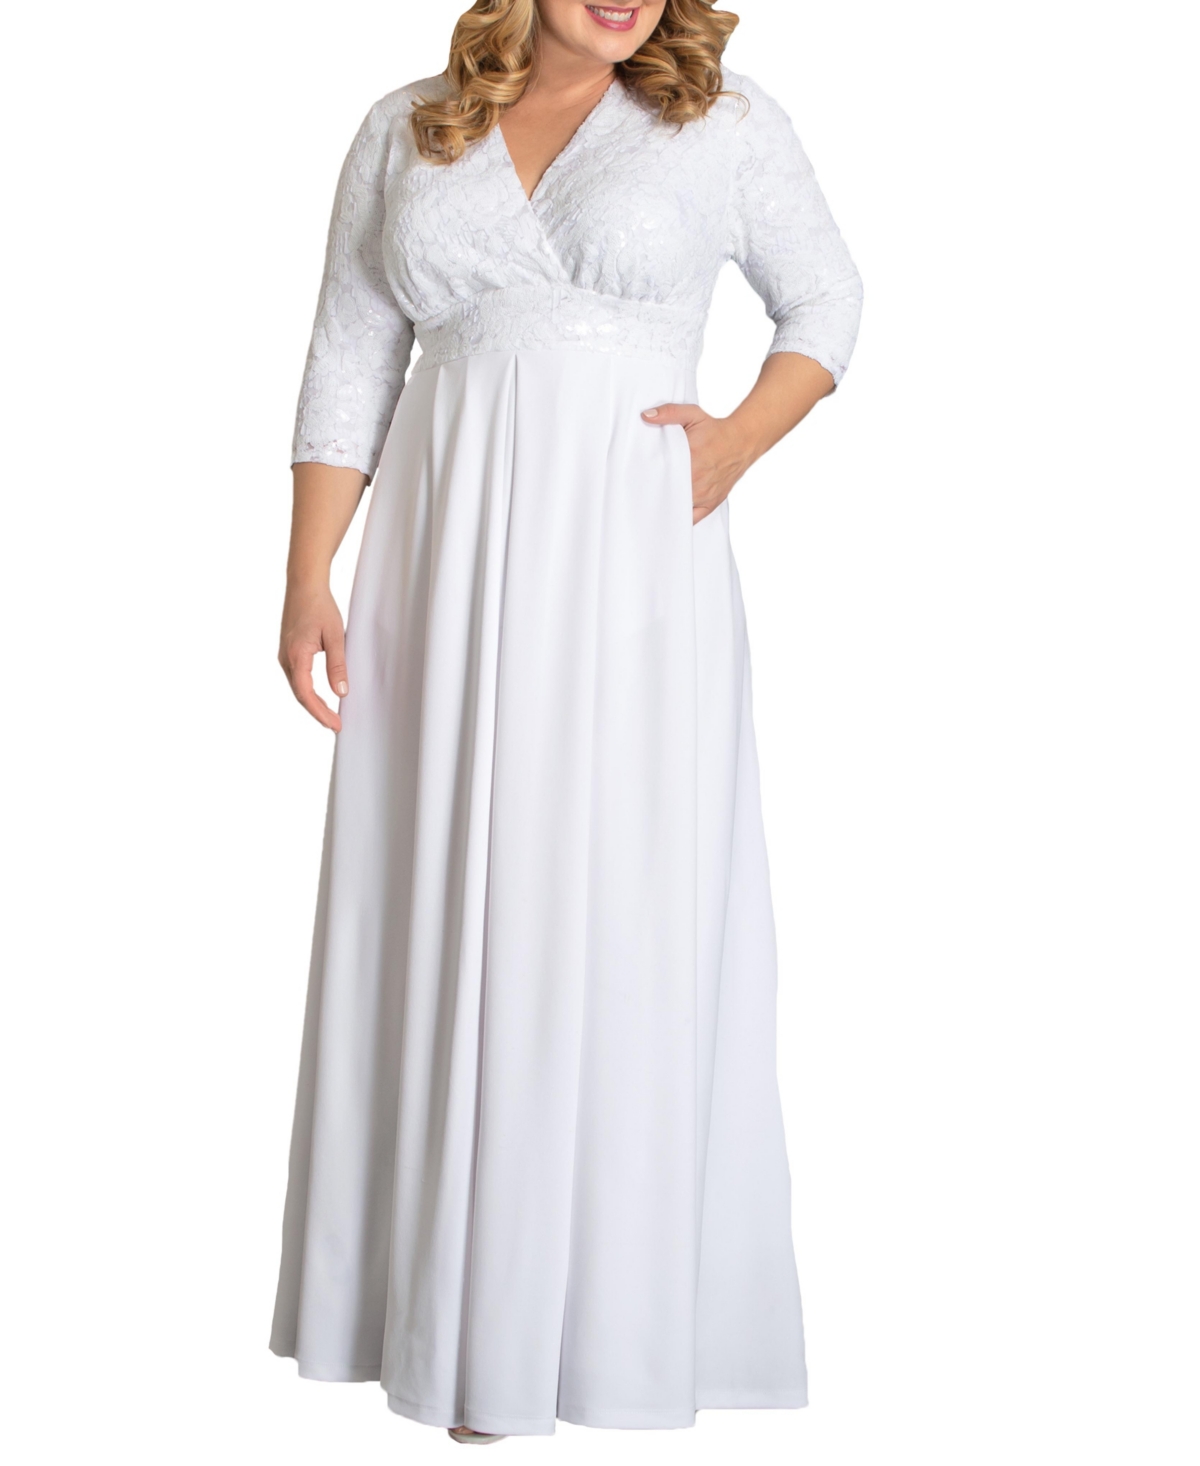 Women's Plus Size Starlight Sequined Wedding Gown - White